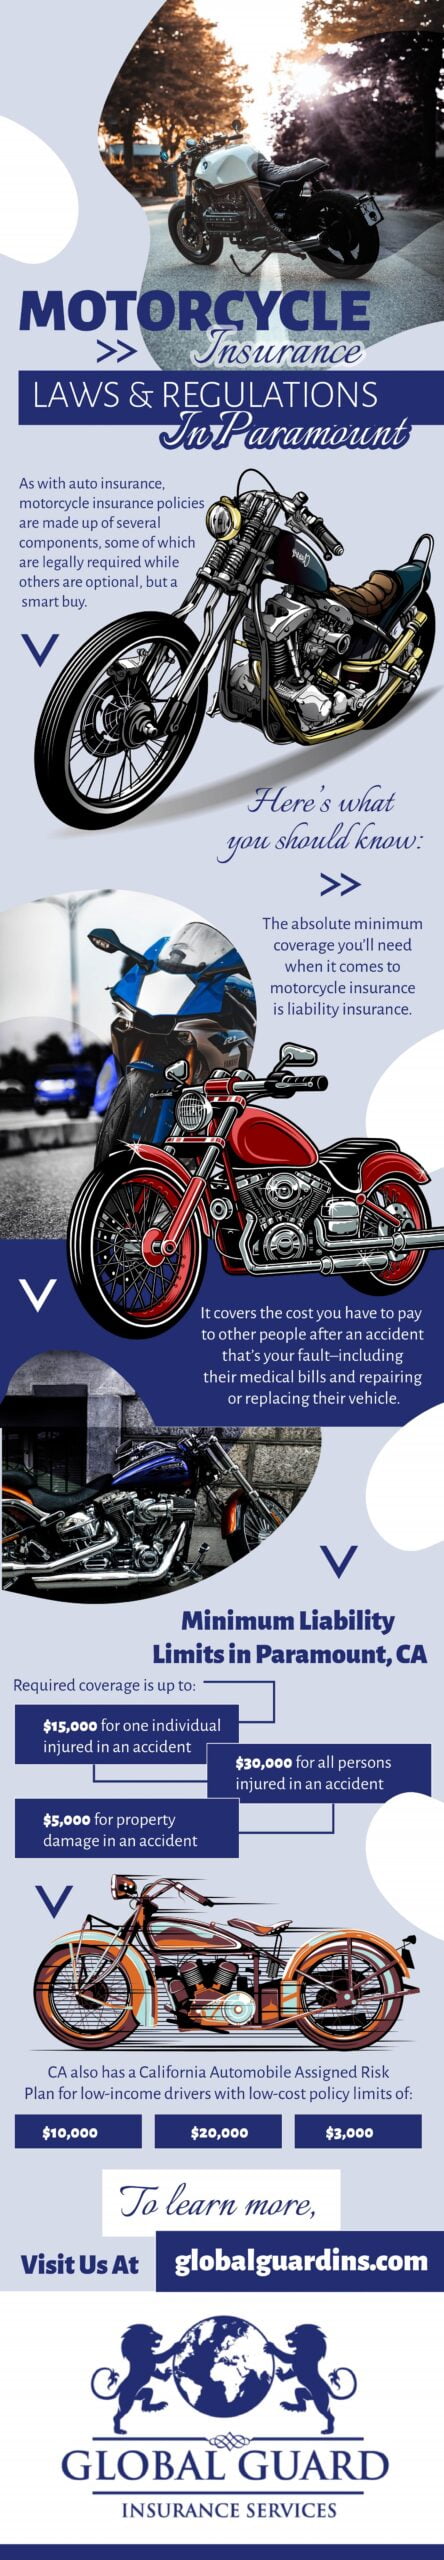 Motorcycle Insurance - Laws and Regulations In Paramount